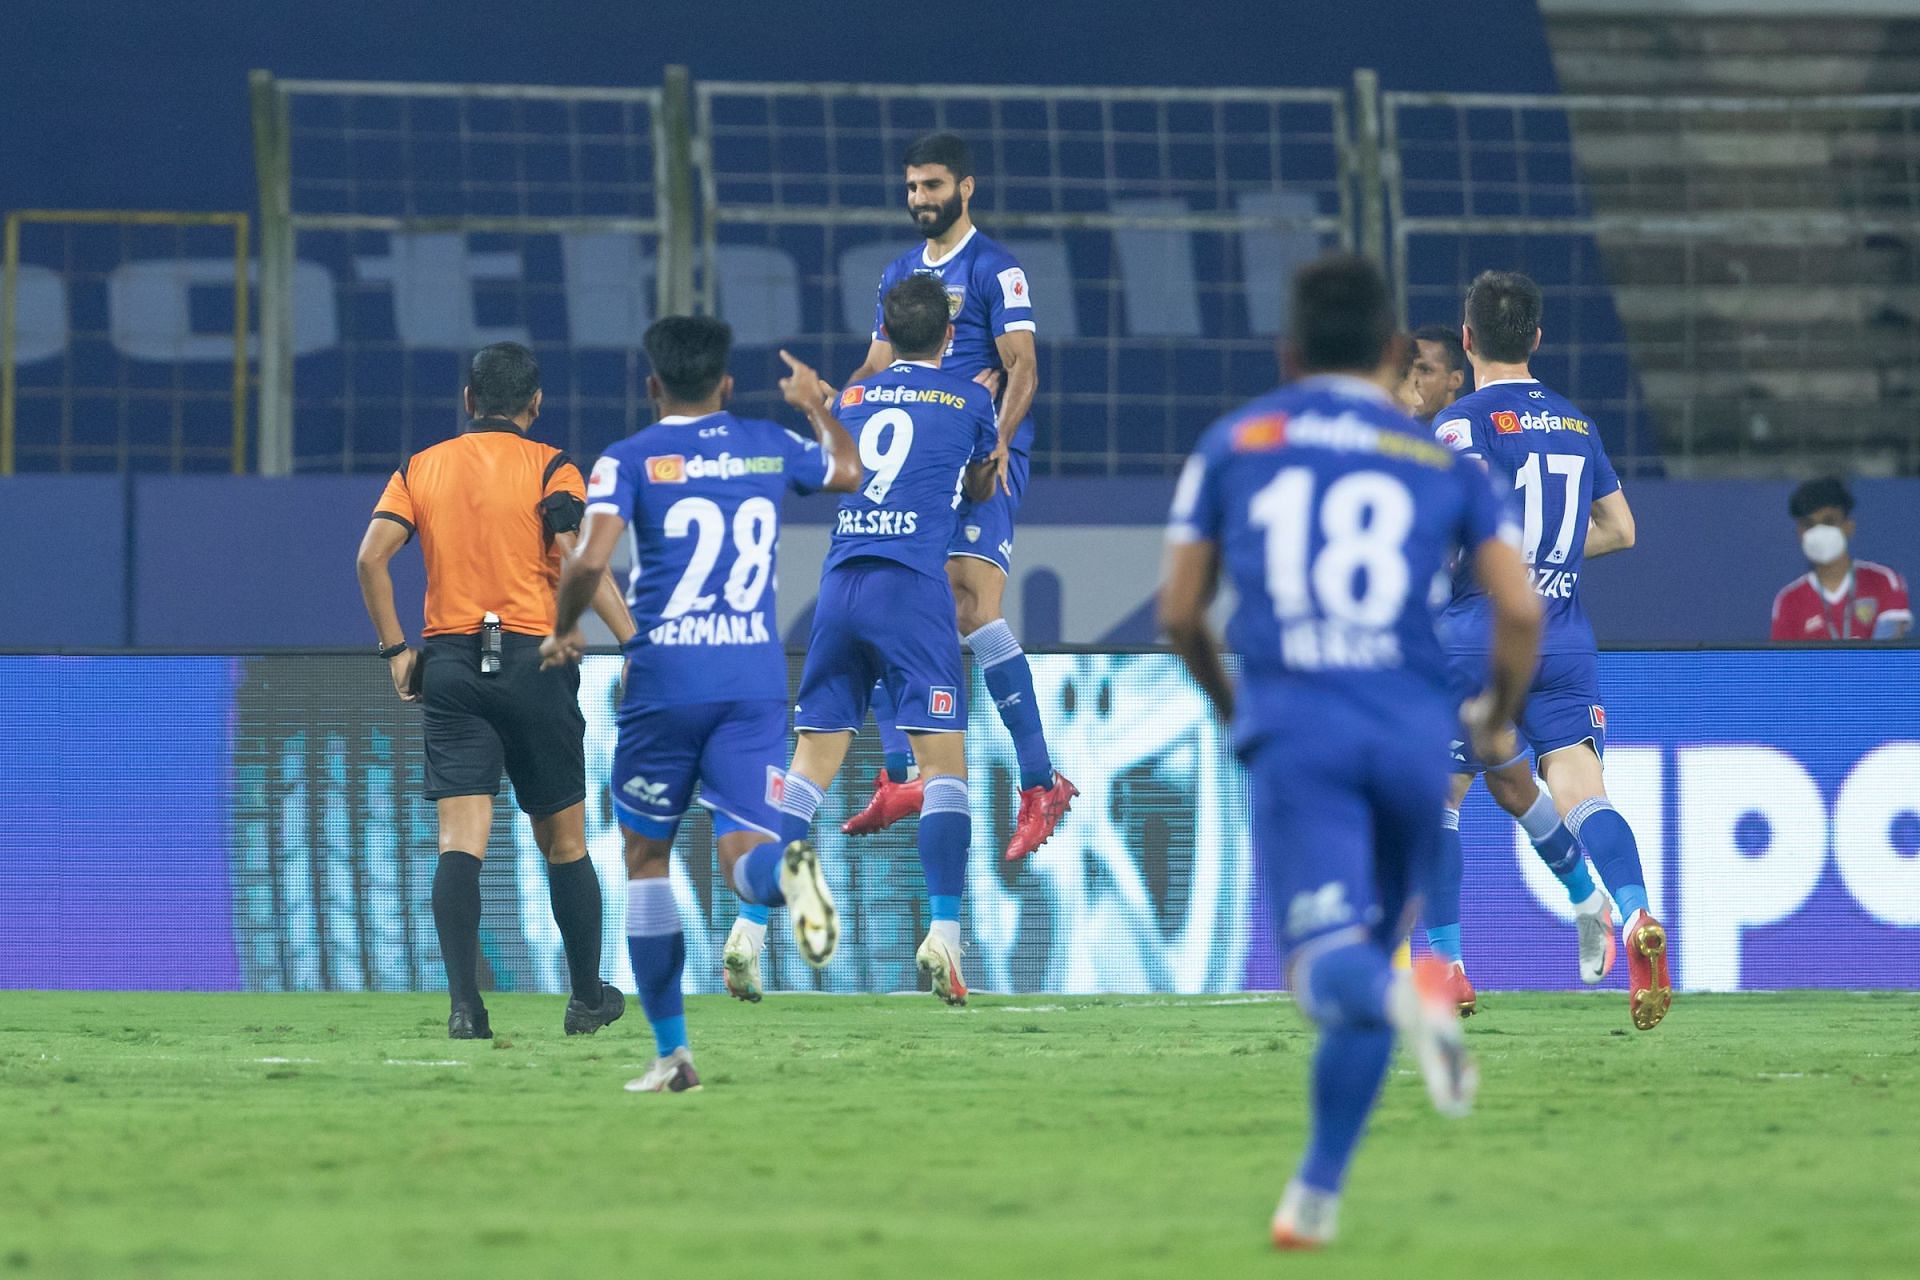 Chennaiyin FC&#039;s Sajid Dhot opened the scoring for the game against Hyderabad FC (Image Courtesy: ISL)